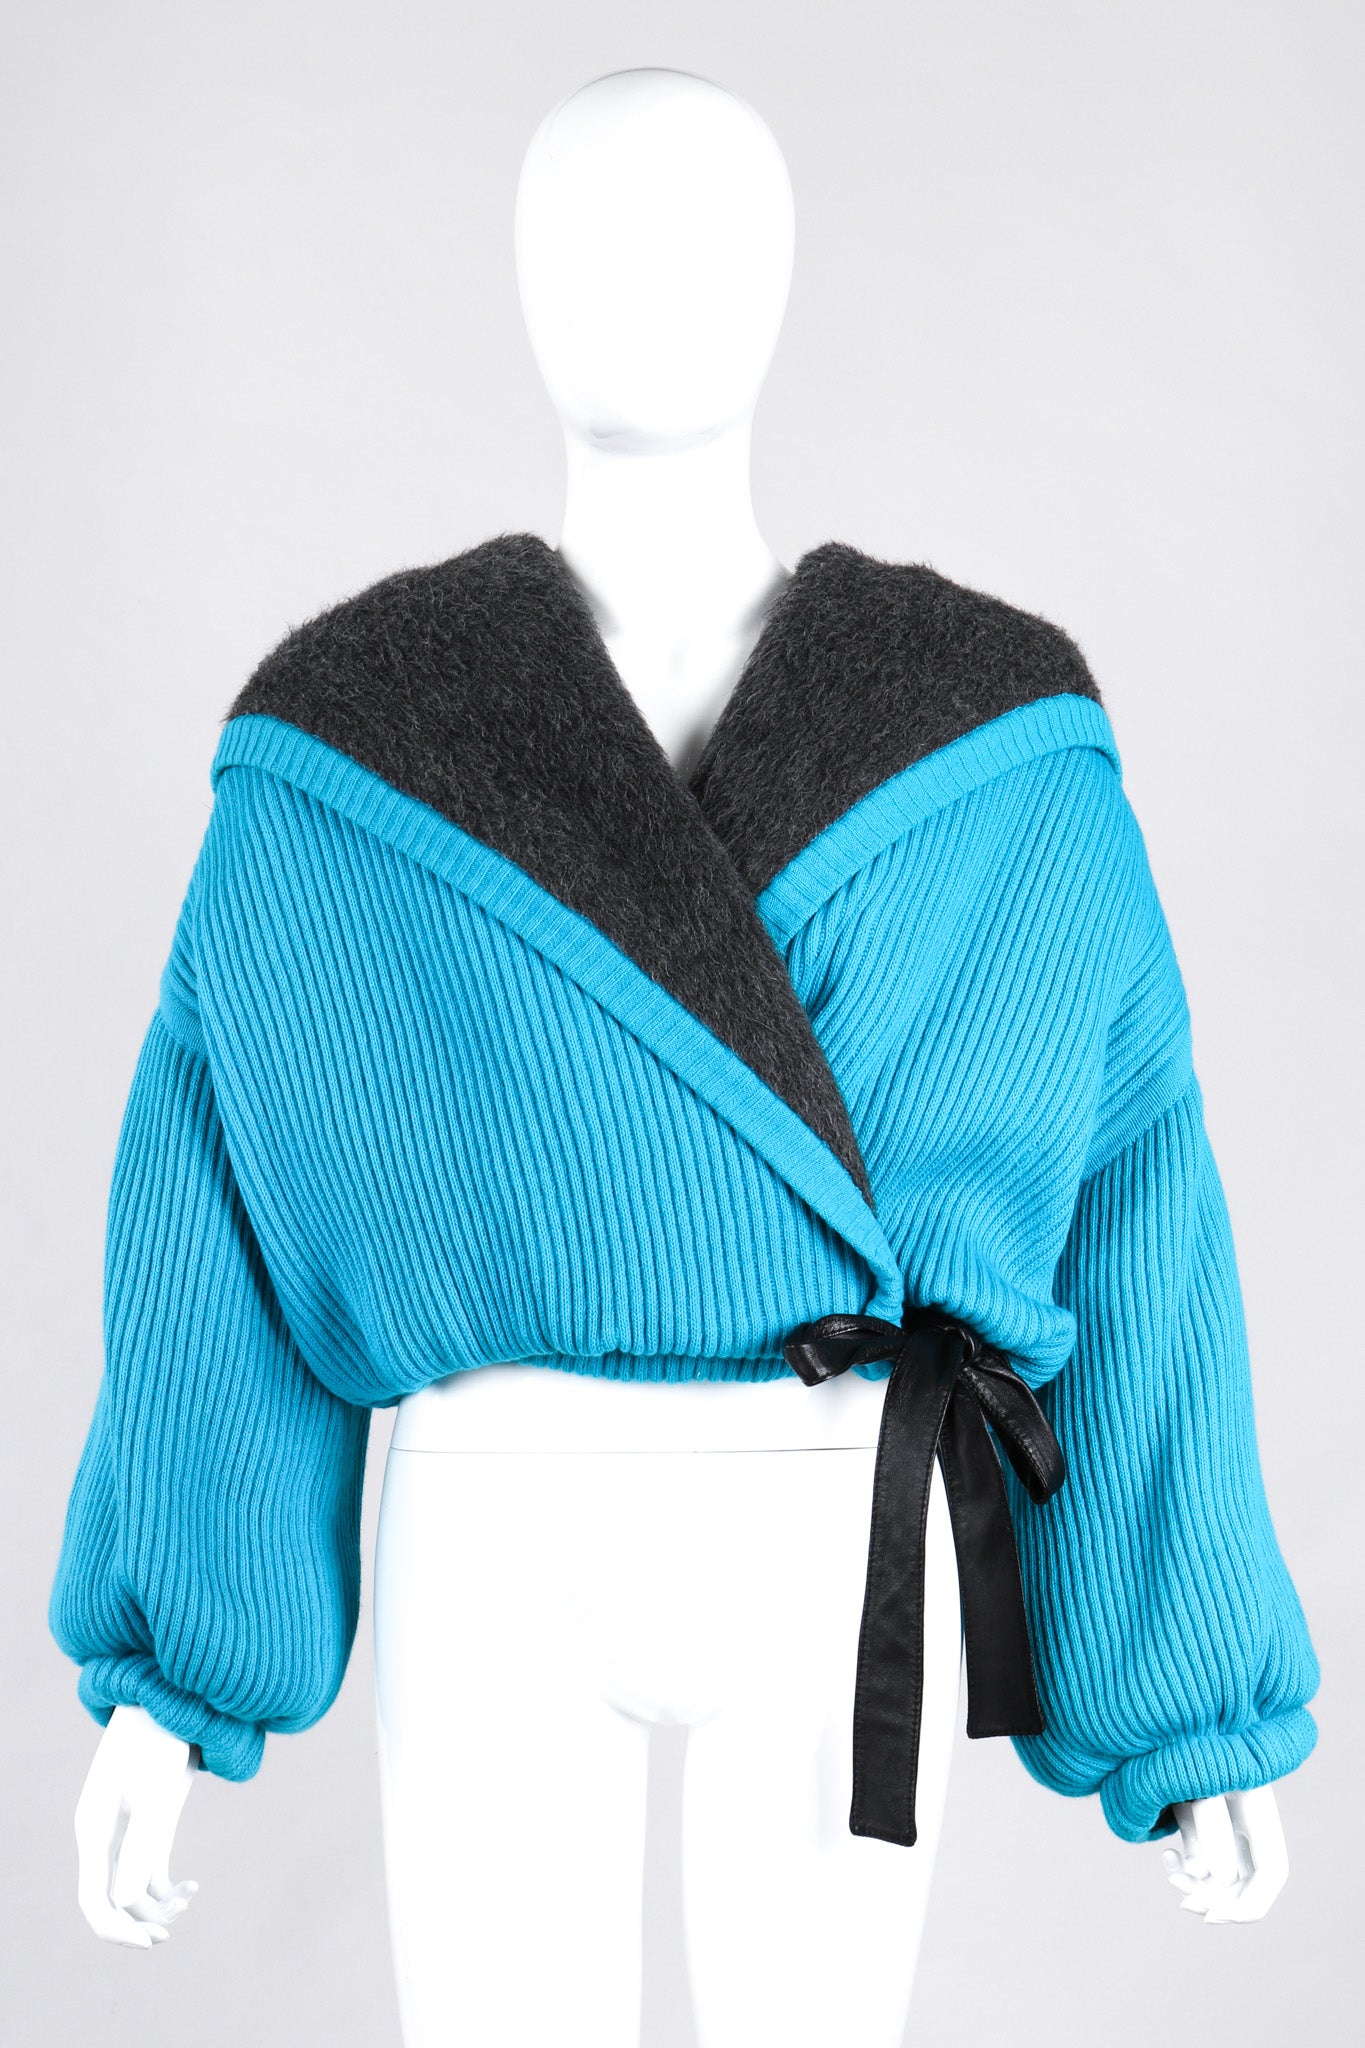 Recess Los Angeles Vintage Giancfranco Ferre Avant Garde Wrap Turquoise Short Jacket Hood Front Slit Leather Ties Fuzzy Lining Inner Quilting Puffy